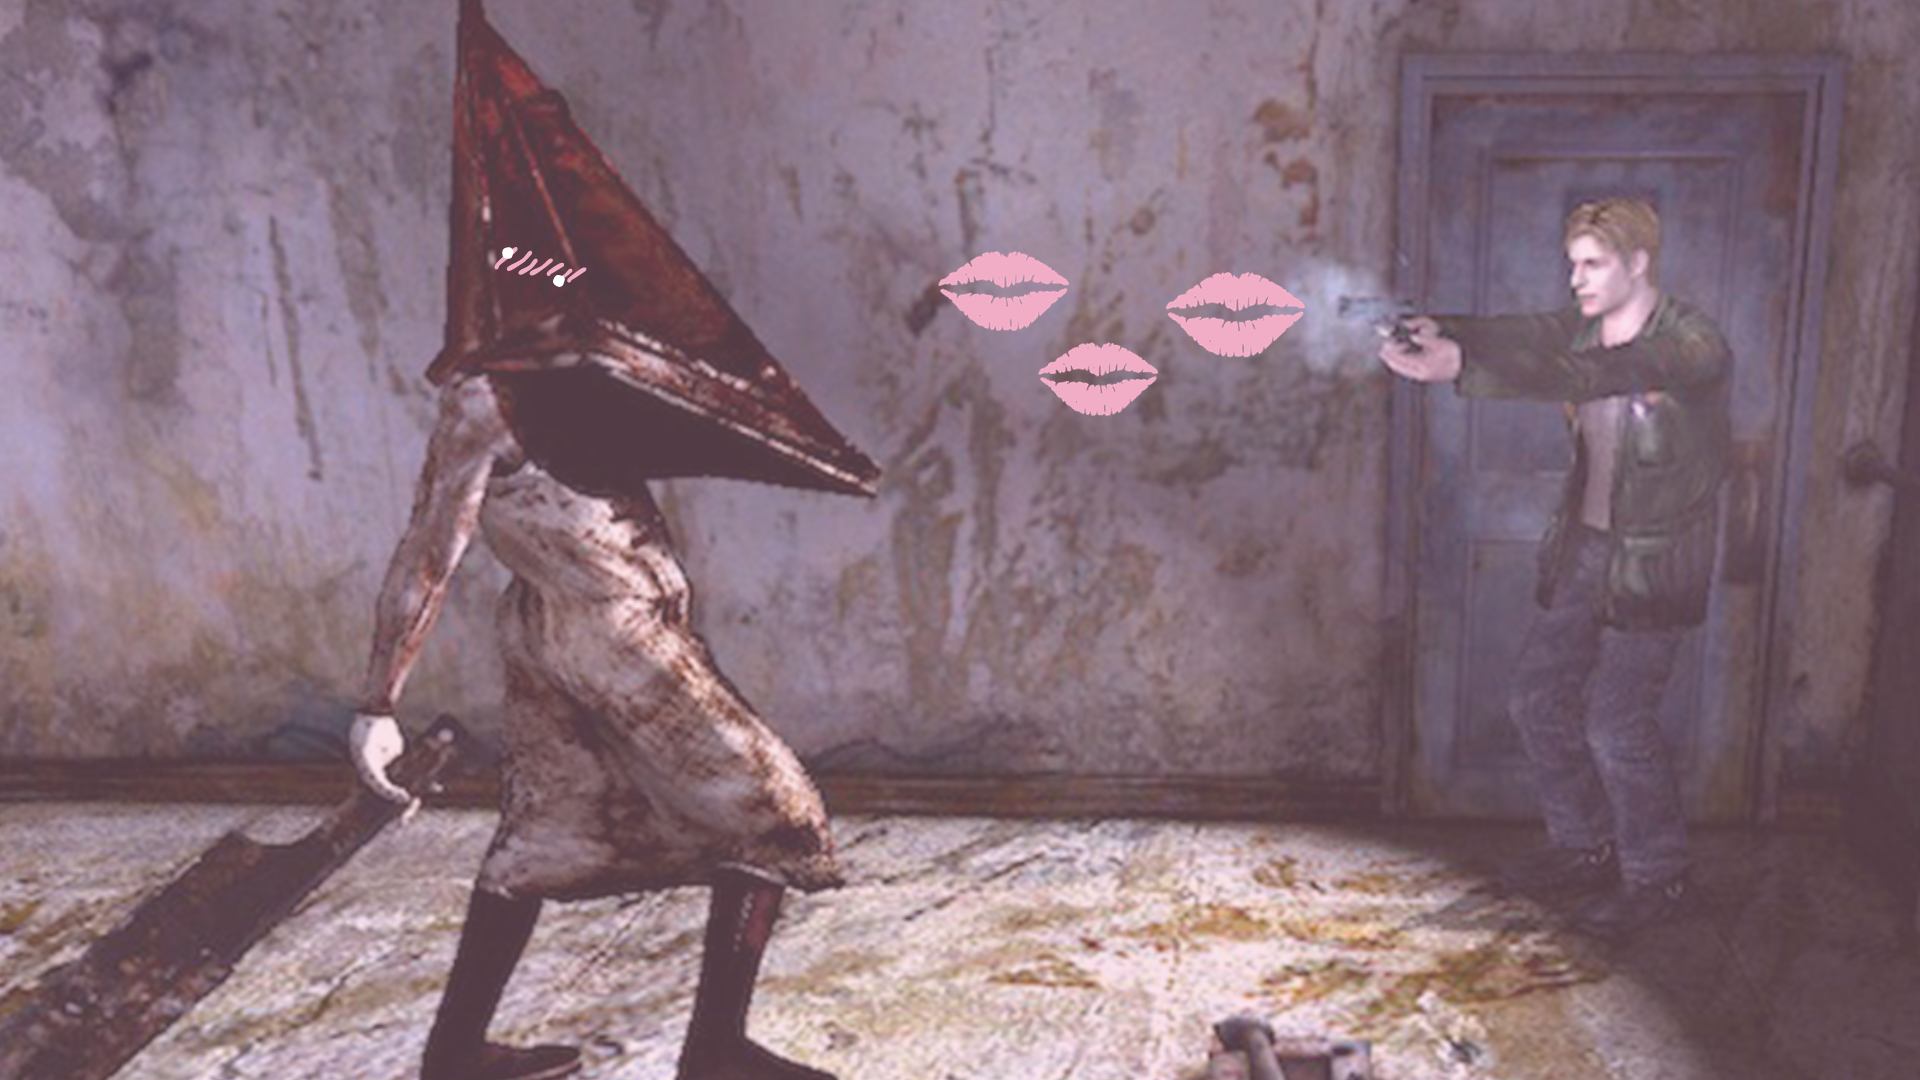 Silent Hill 2 goes all cute with this Pyramid Head plush